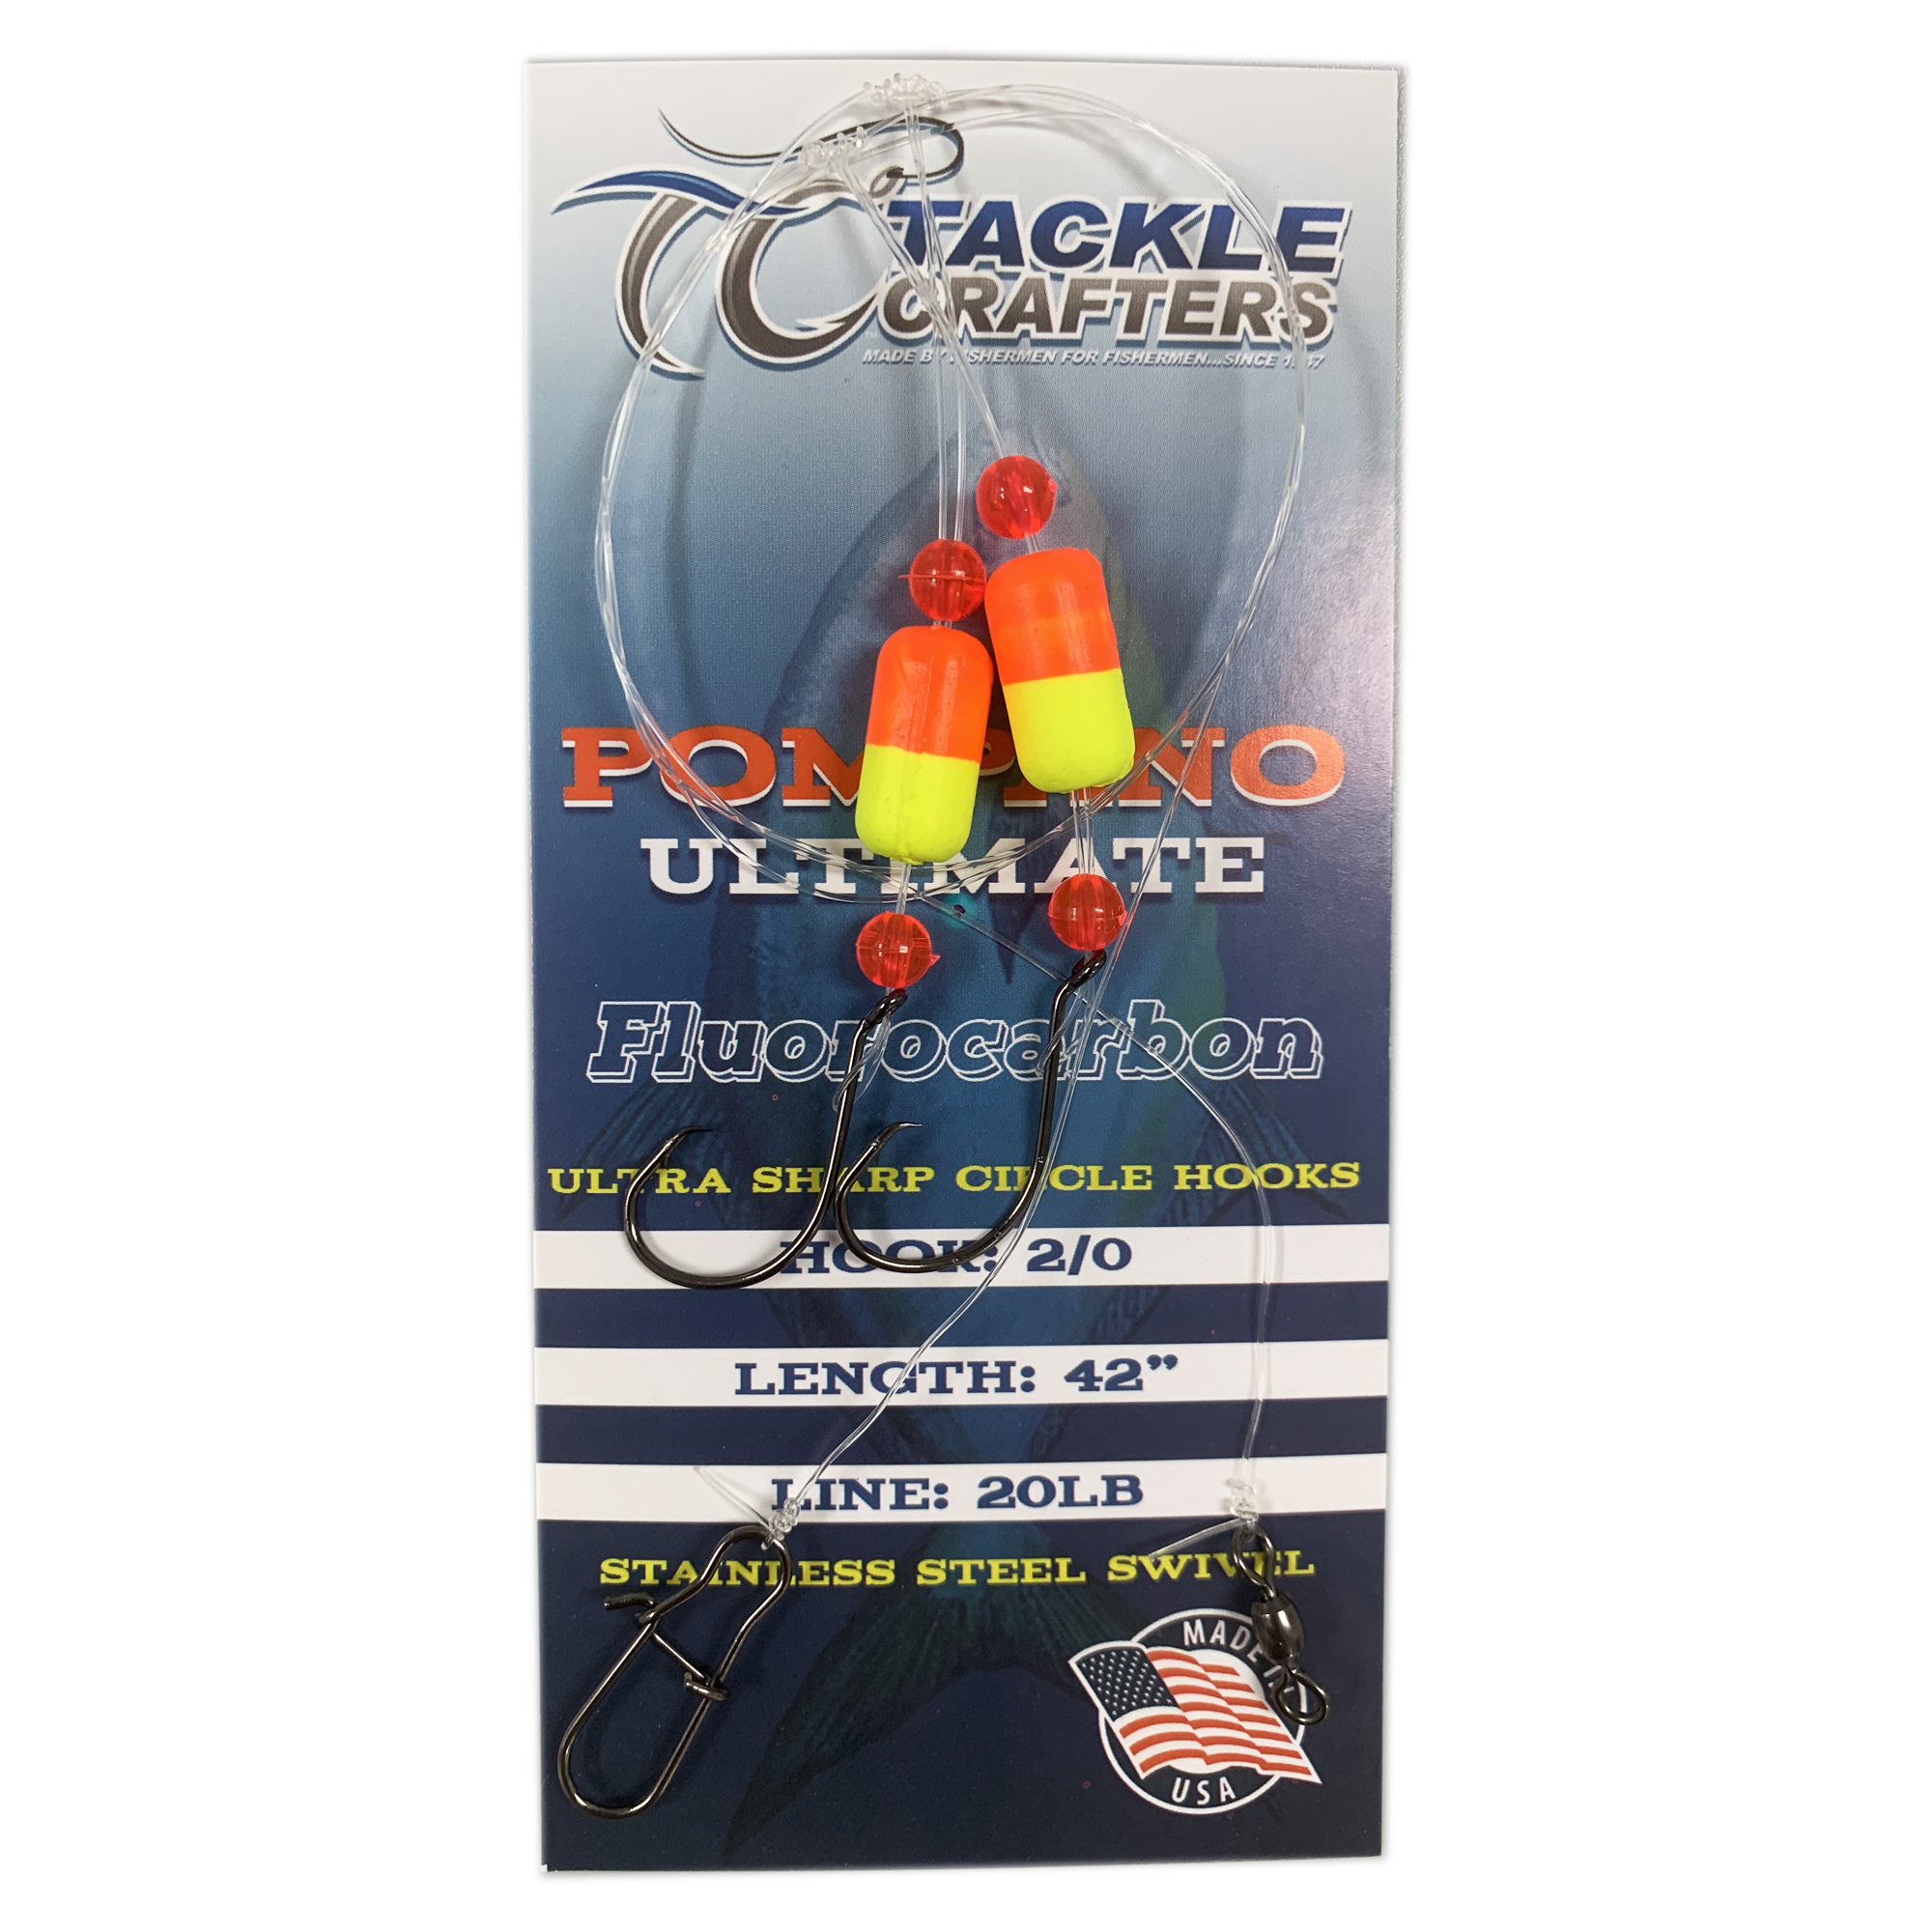 https://www.tacklecrafters.com/wp-content/uploads/2016/03/Pompano_Ultimate-1.jpg